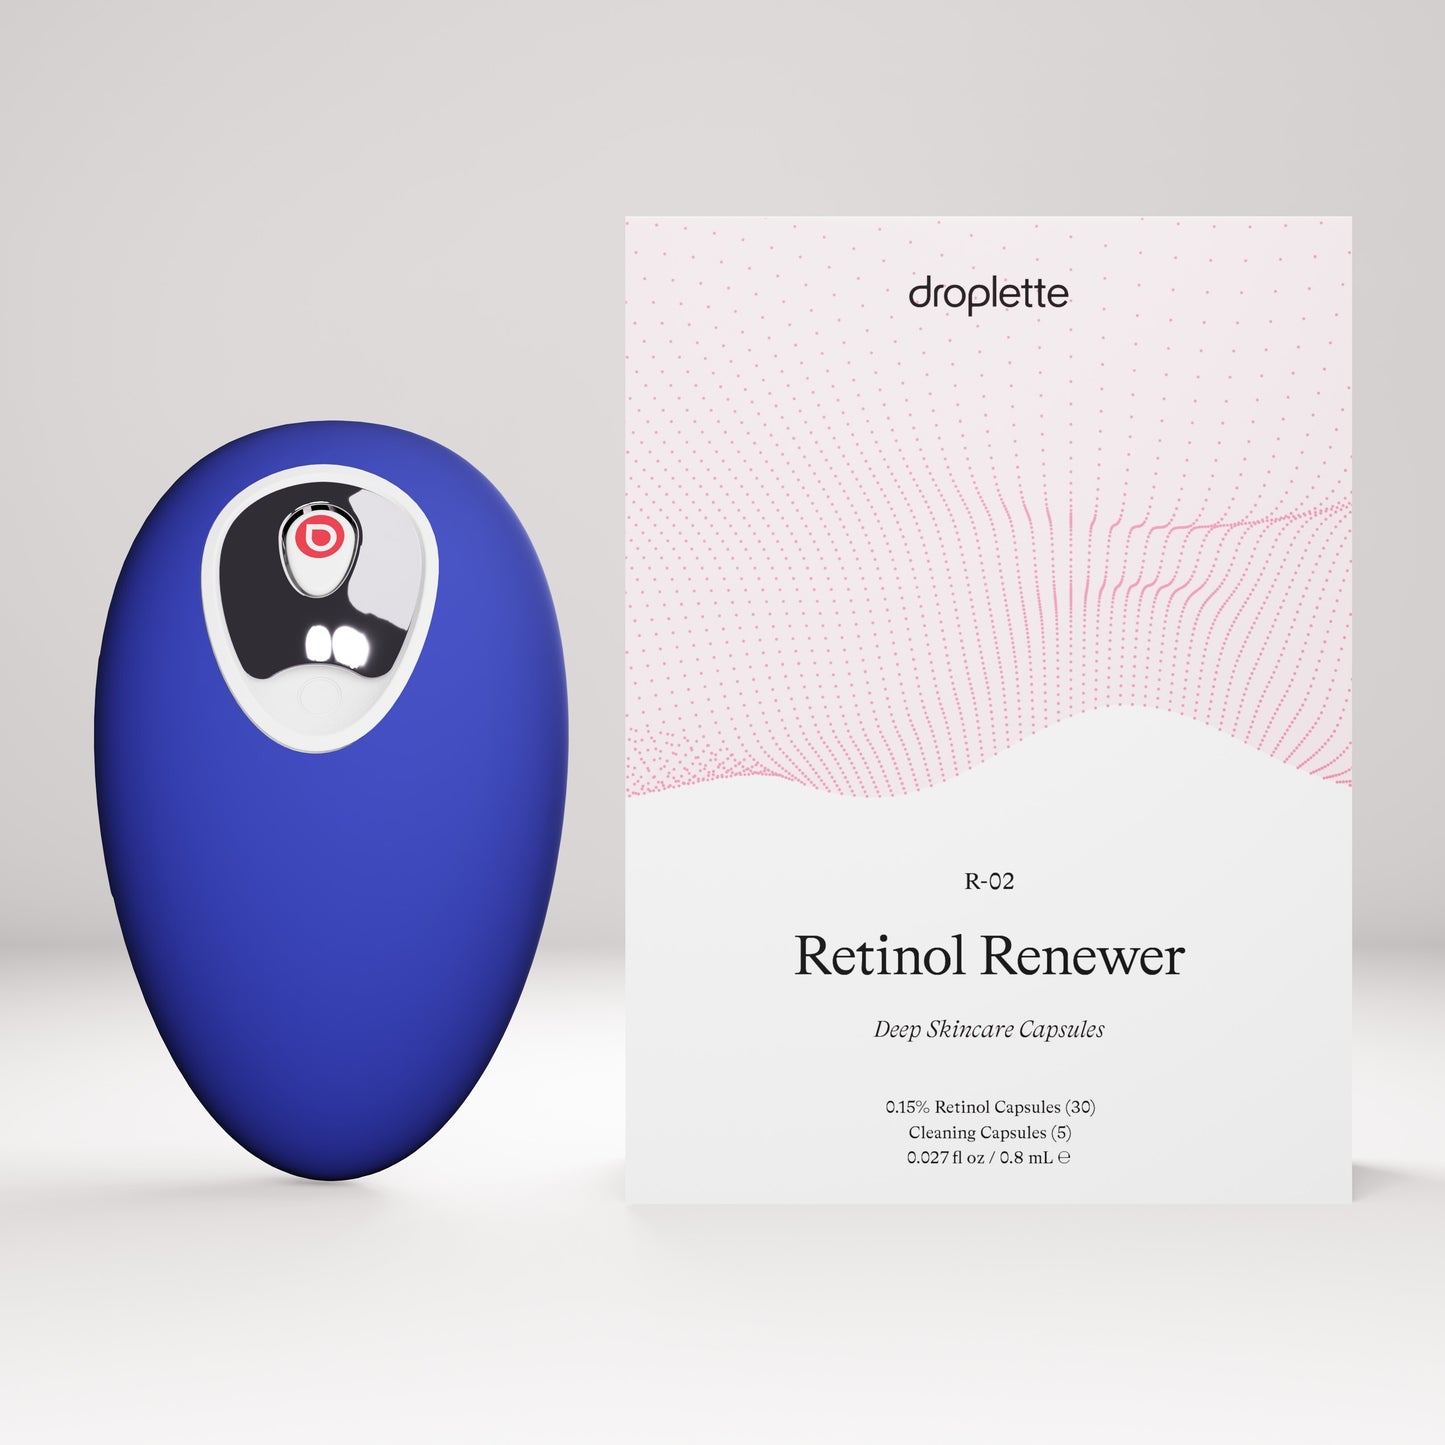 Cobalt Blue Droplette Device sits beside a 30 capsule sized box of Droplette's Retinol Renewer capsules